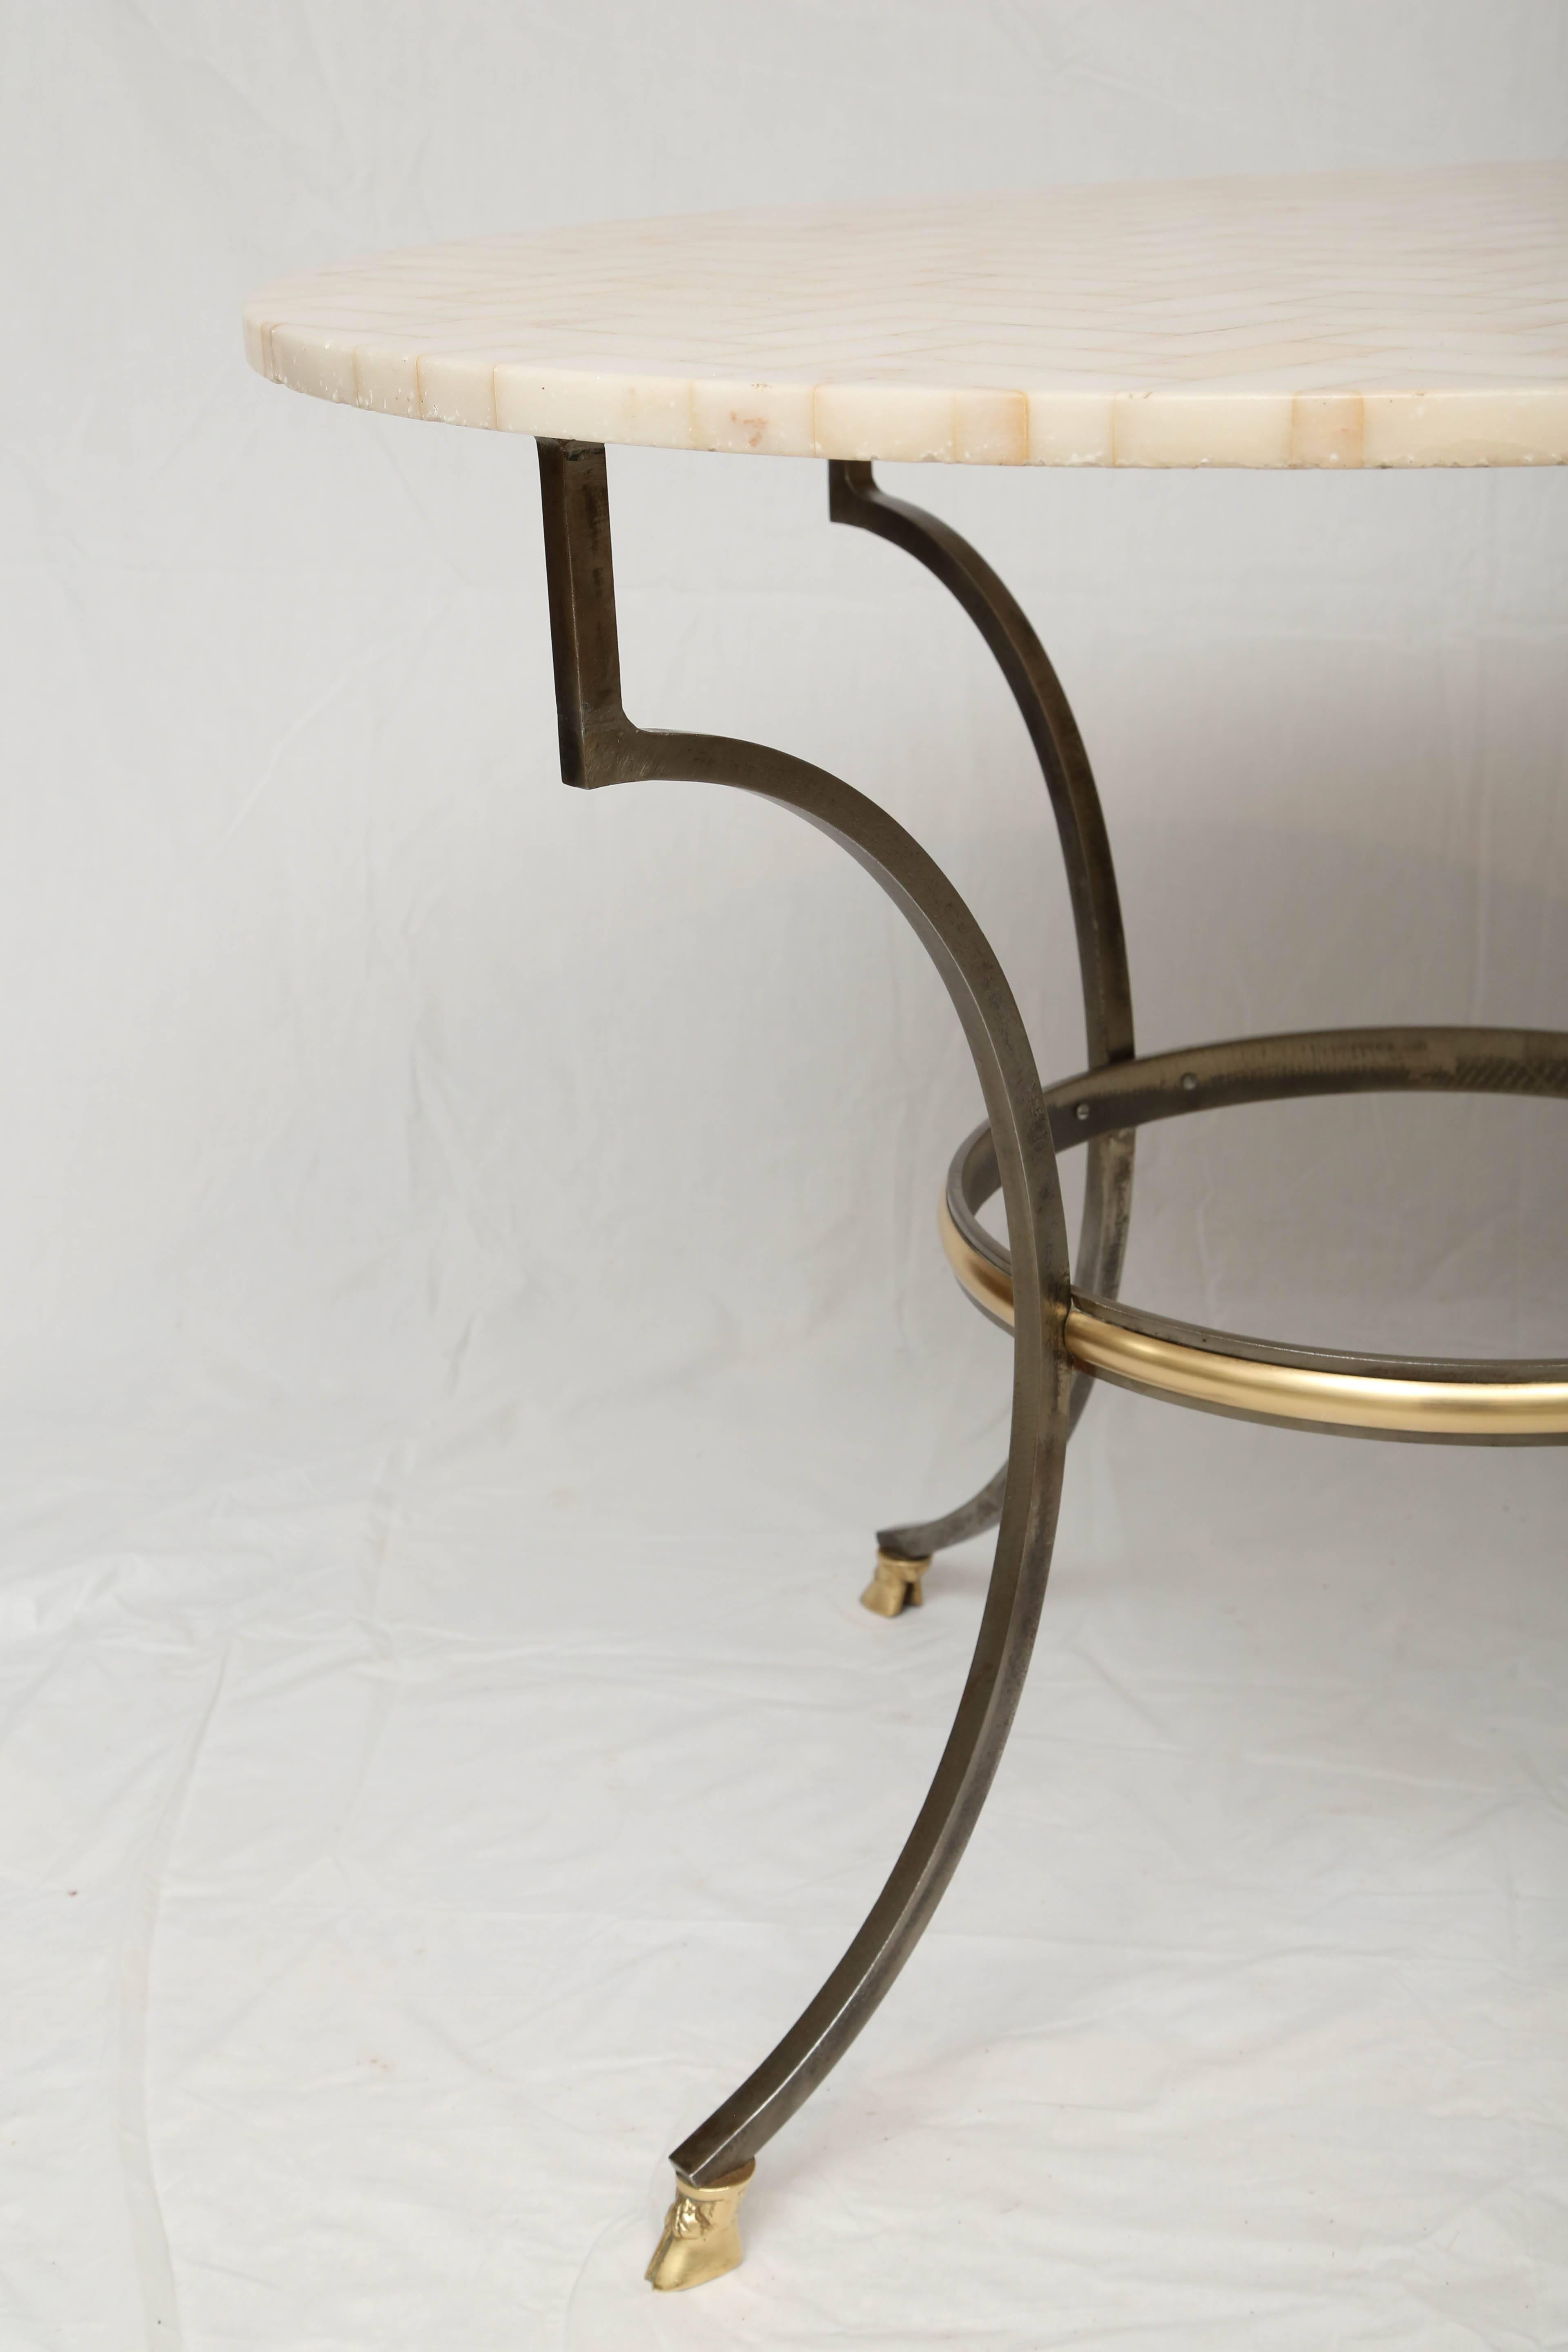 Italian Steel and Brass Table with Basketweave Marble Top